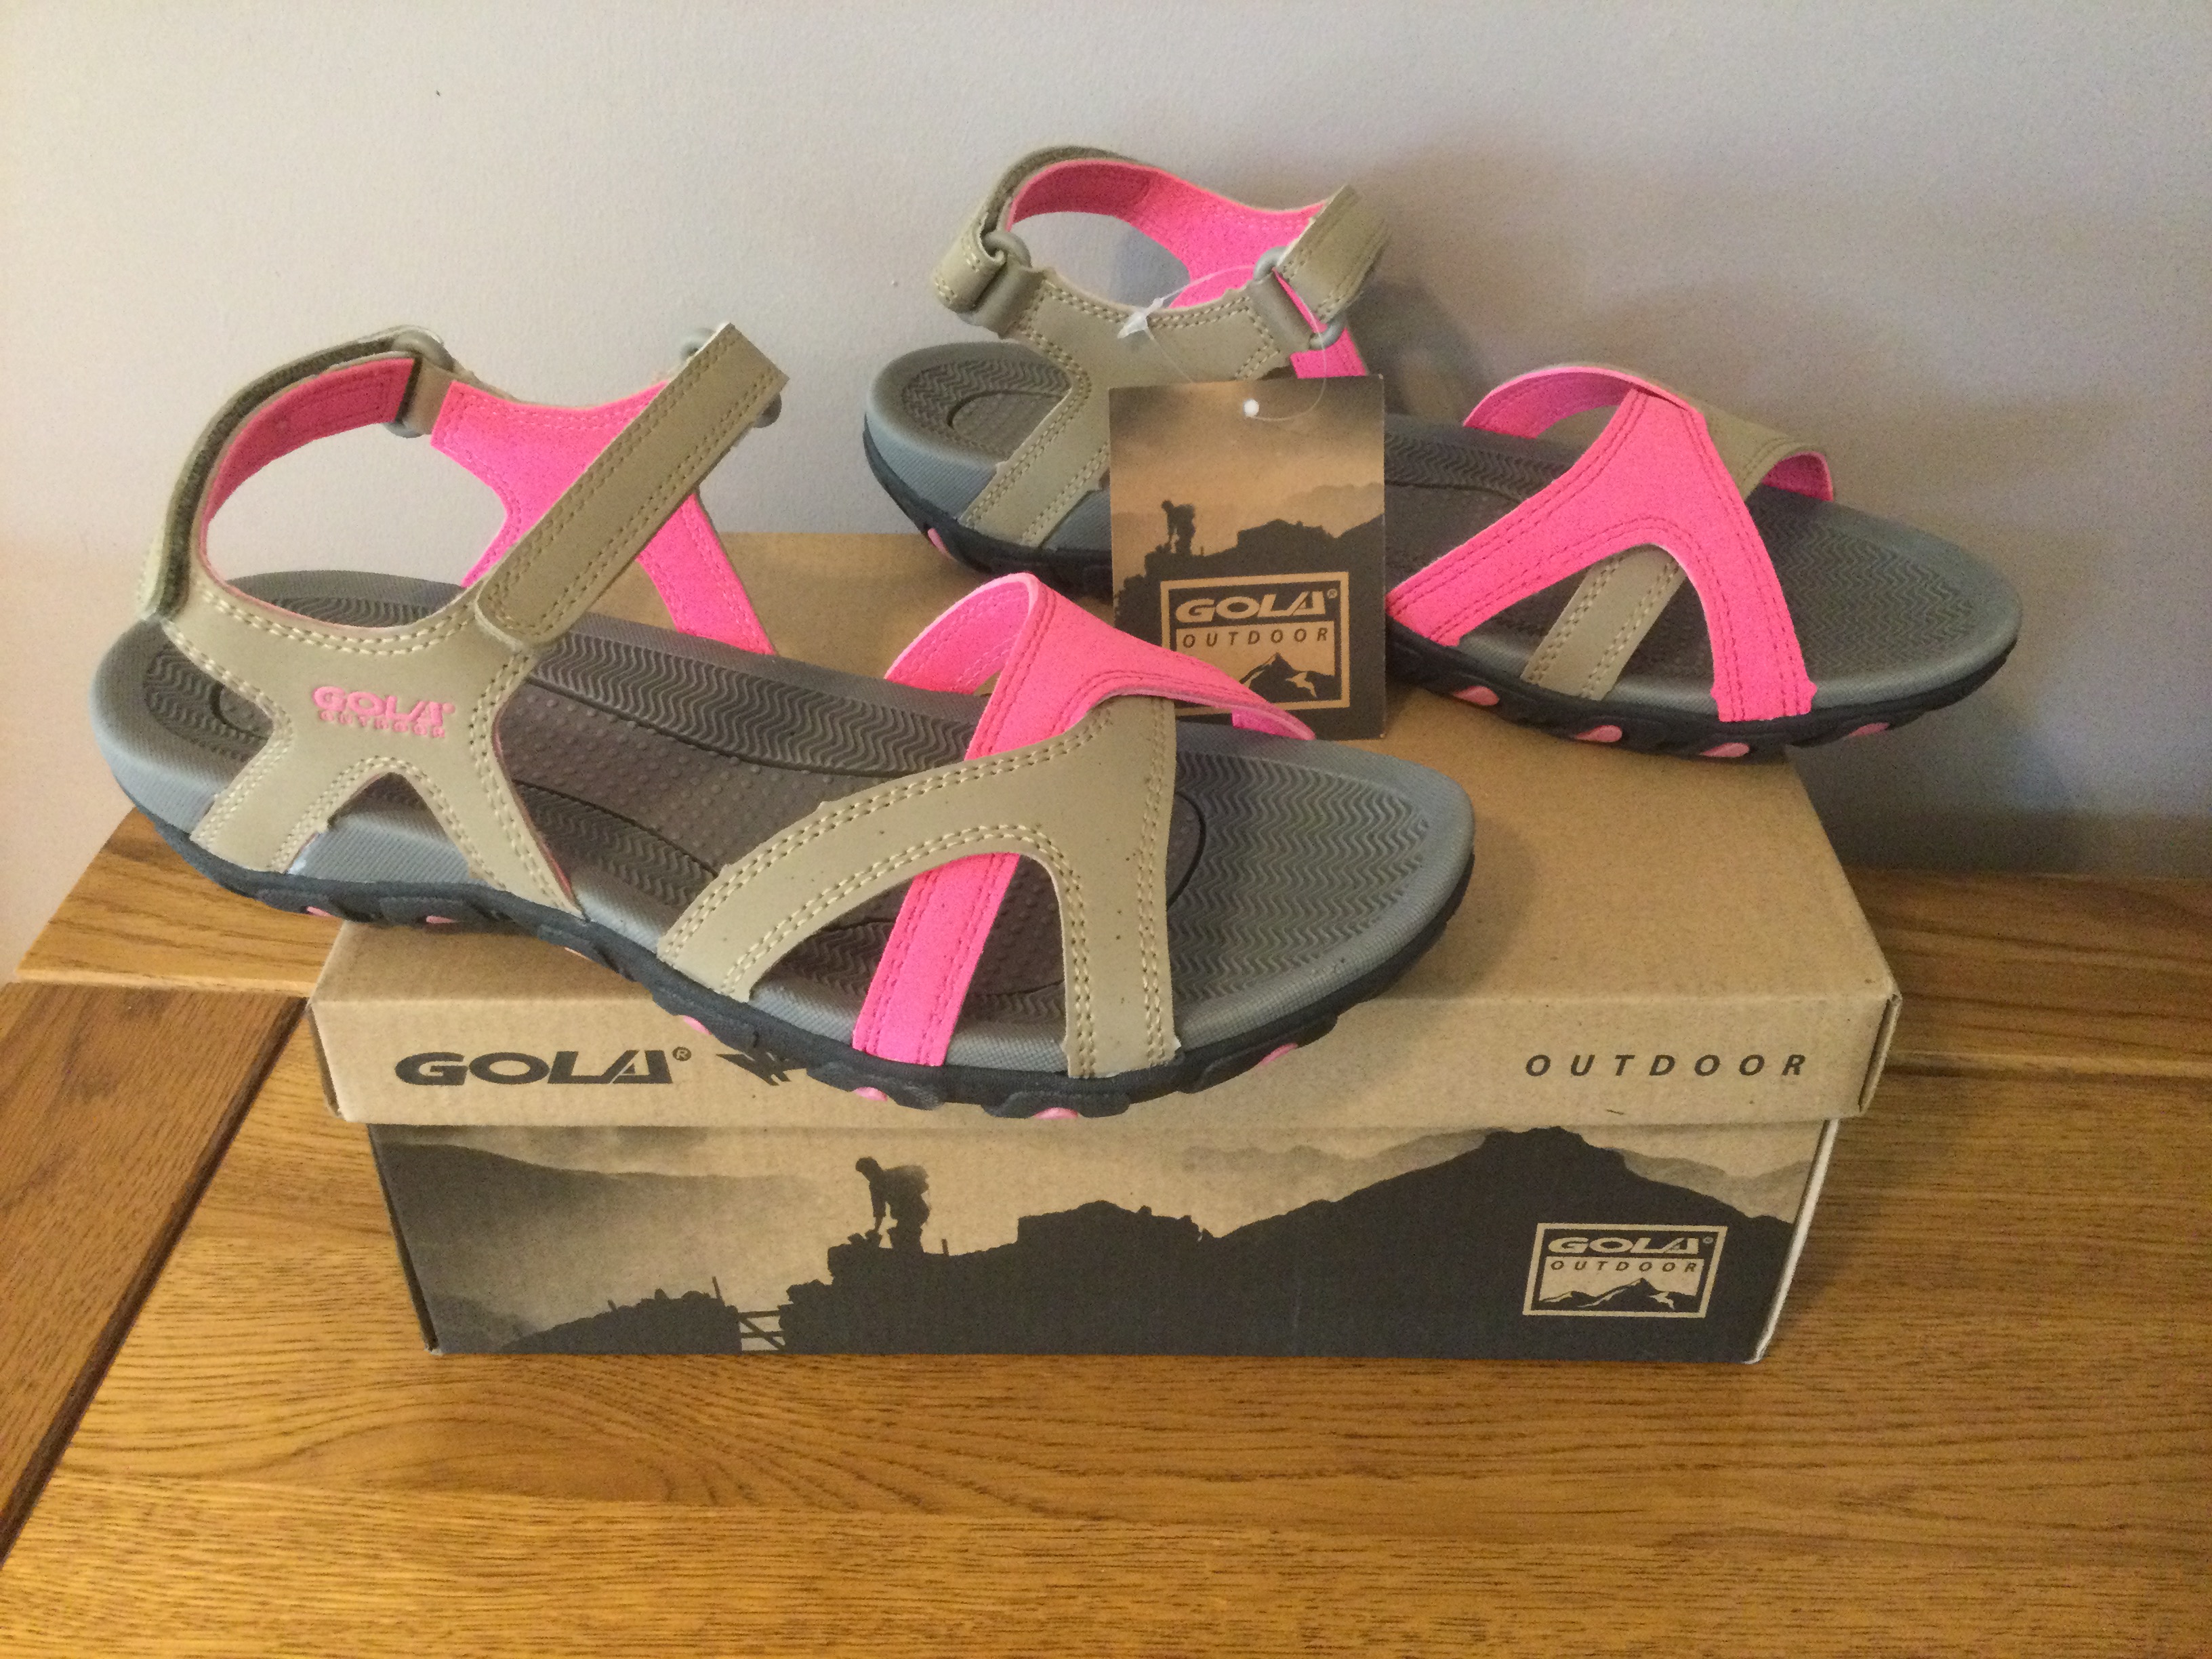 Gola Womens “Cedar” Hiking Sandals, Taupe/Hot Pink, Size 7 - Brand New - Image 2 of 4